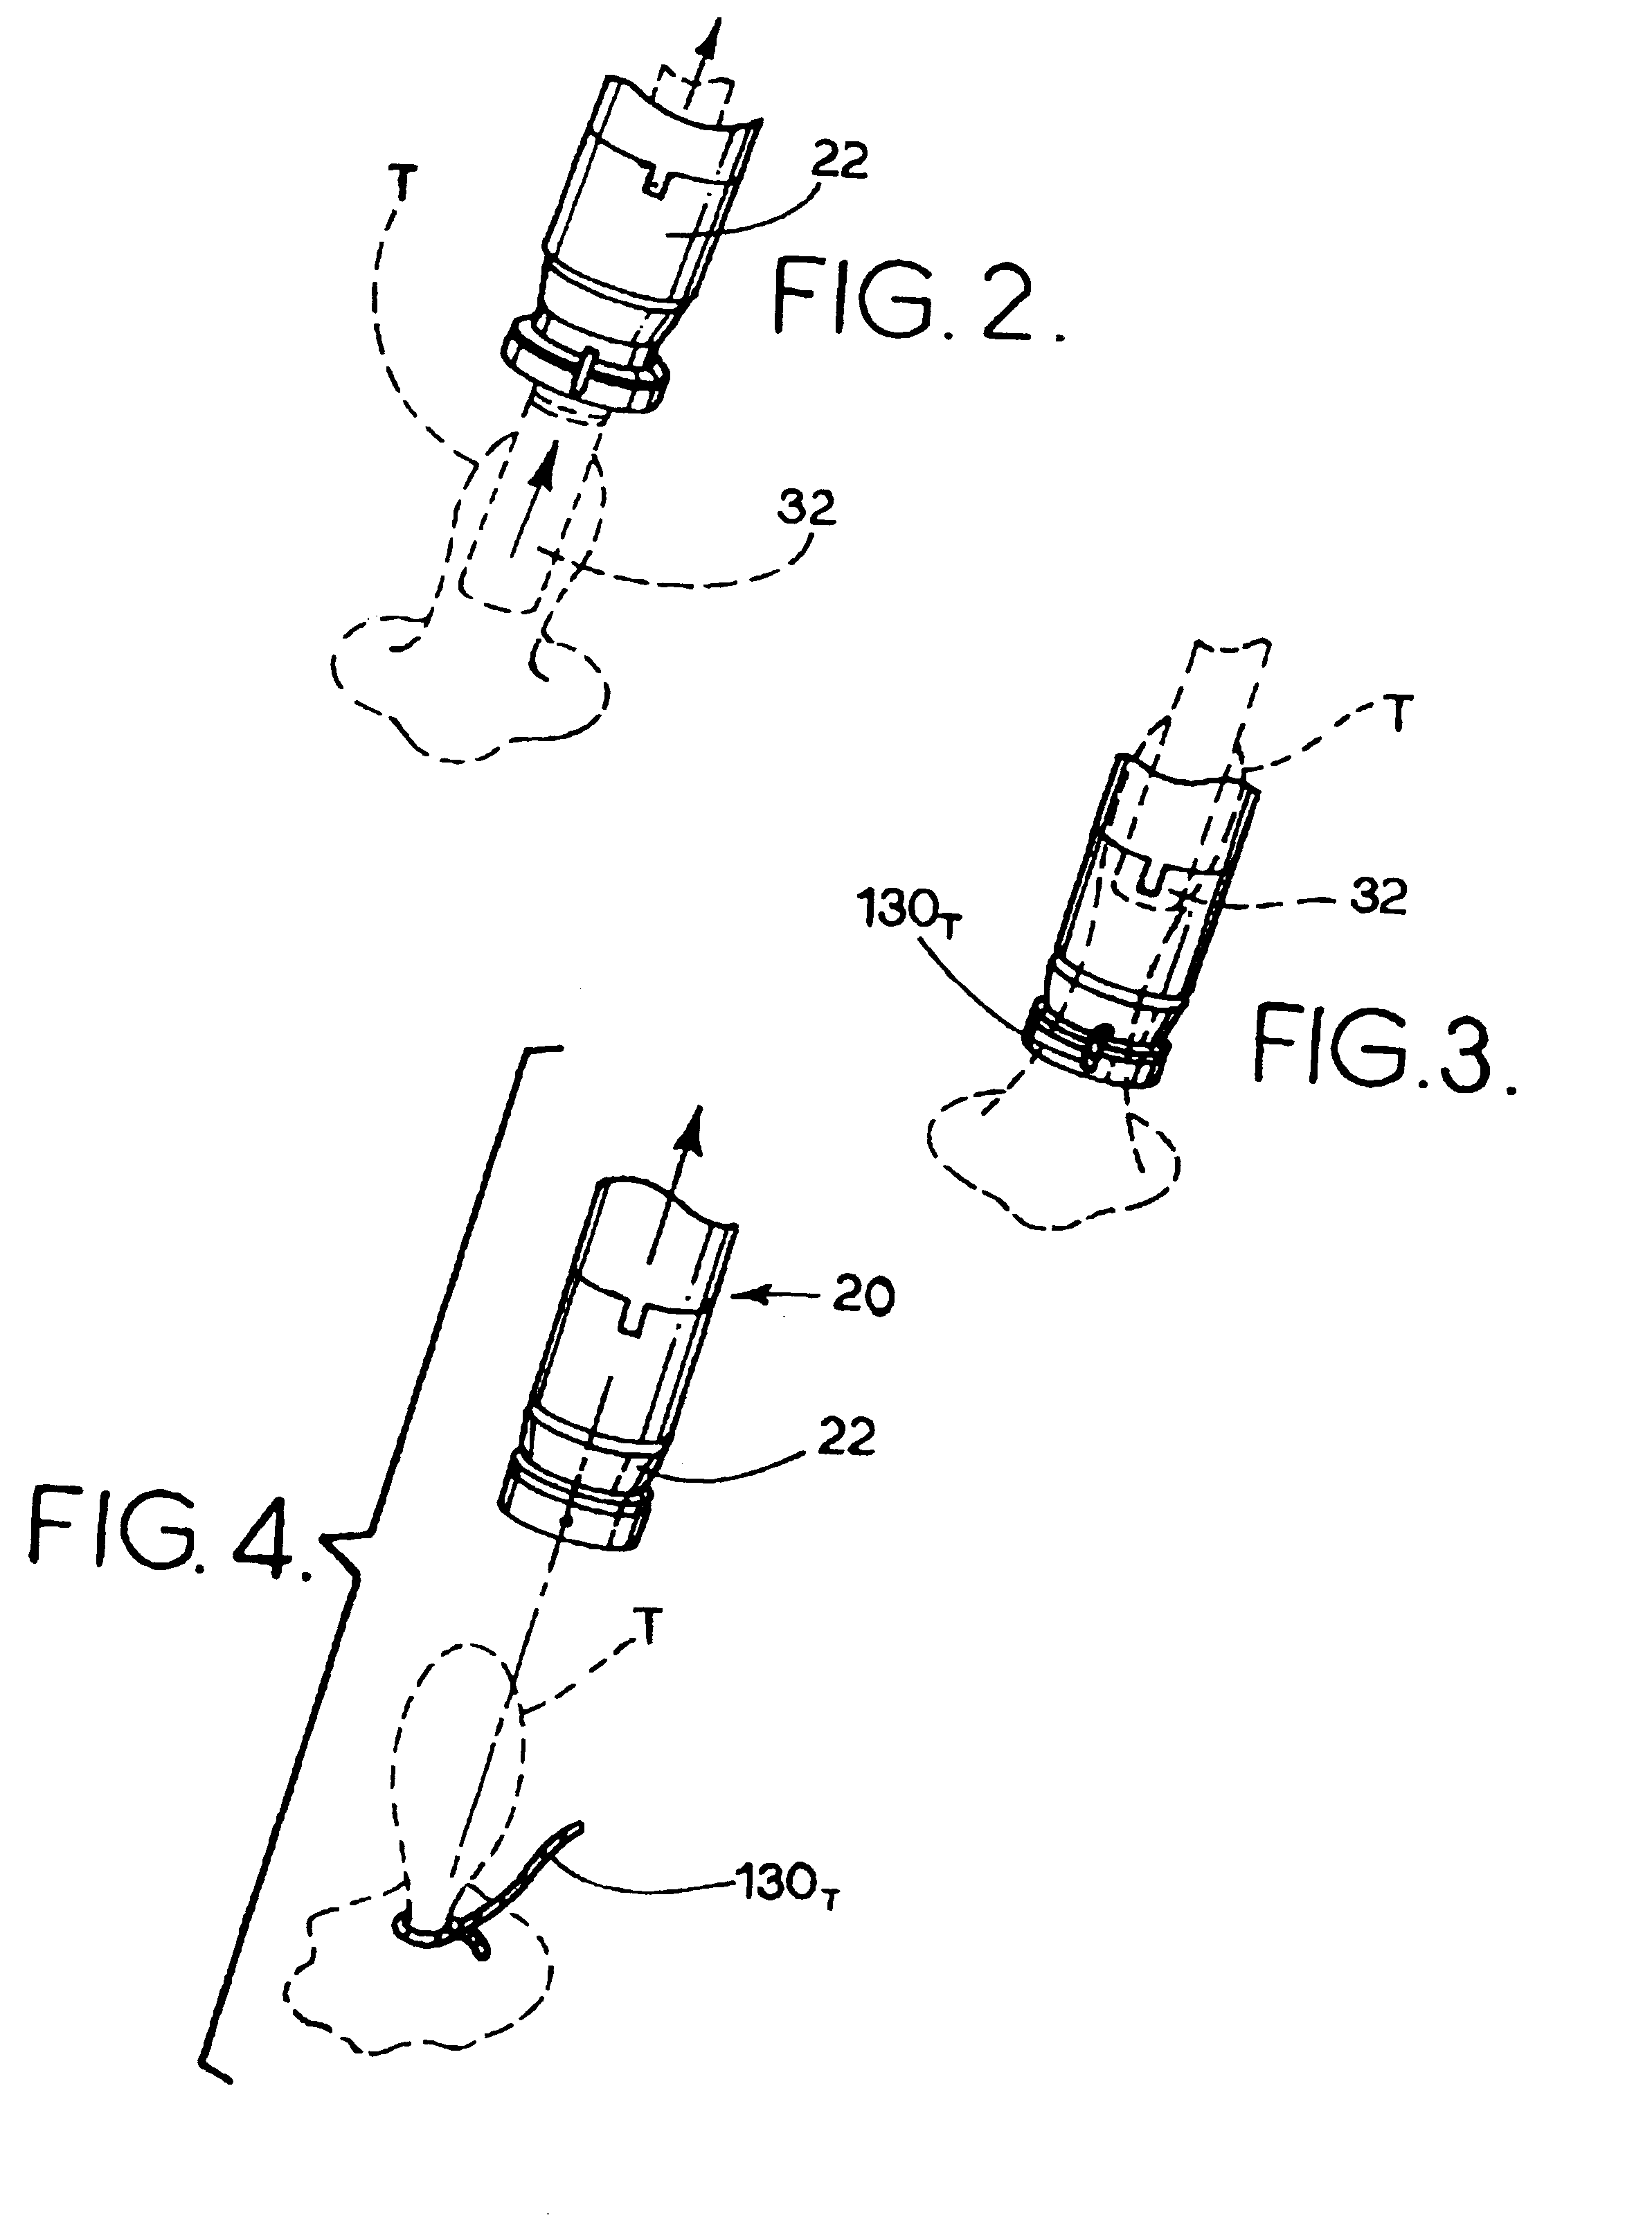 Surgical loop delivery device